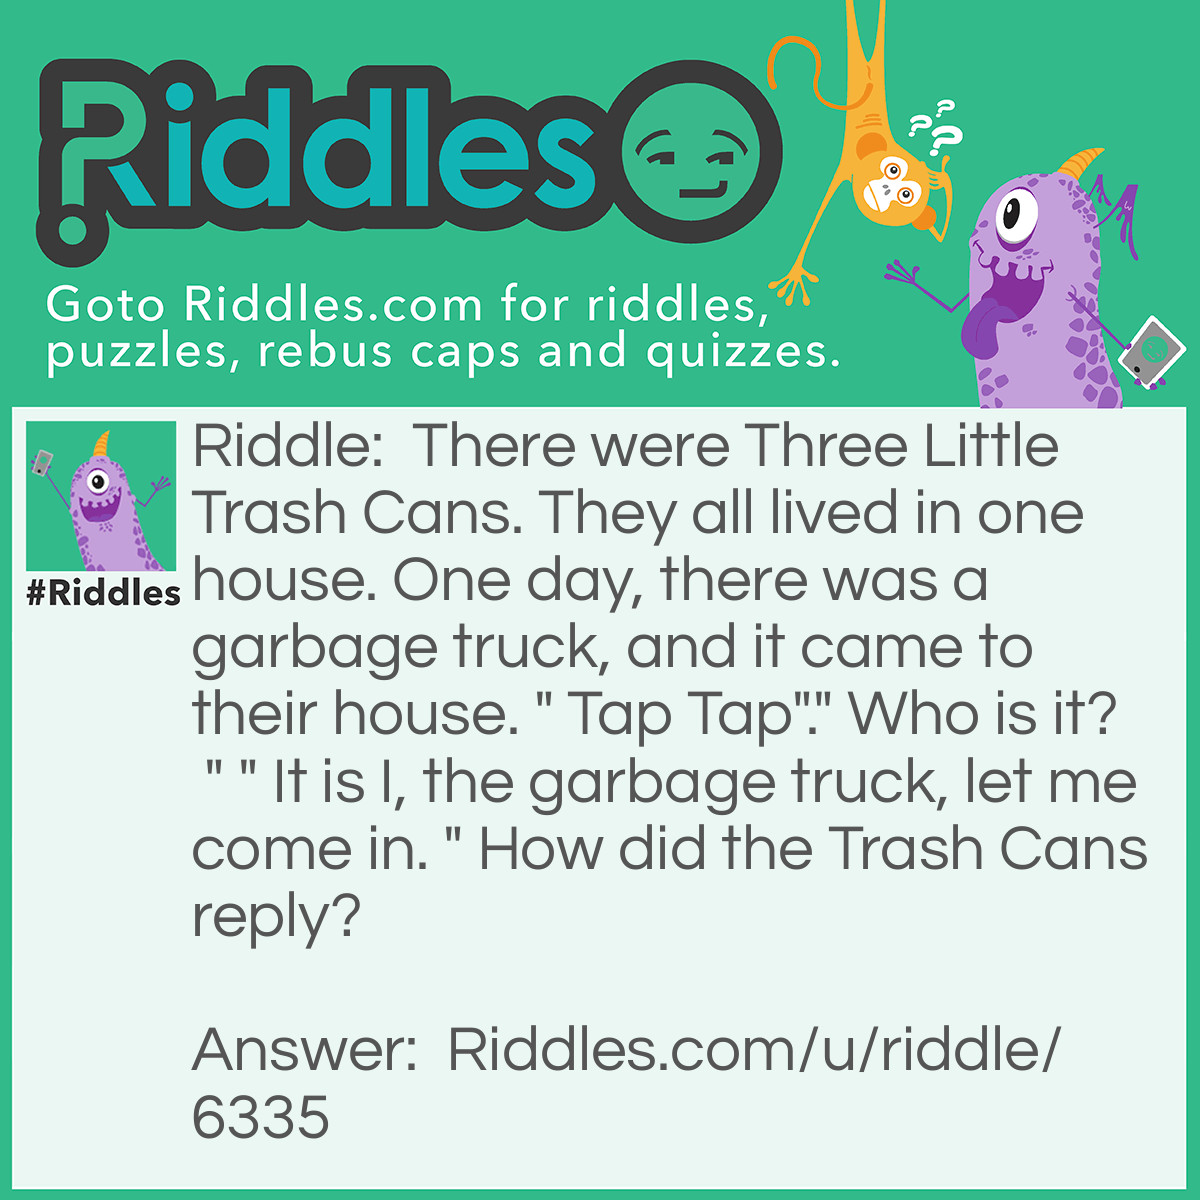 Riddle: There were Three Little Trash Cans. They all lived in one house. One day, there was a garbage truck, and it came to their house. " Tap Tap"." Who is it? " " It is I, the garbage truck, let me come in. " How did the Trash Cans reply? Answer: "Not by the smell of the lids on our bins!"